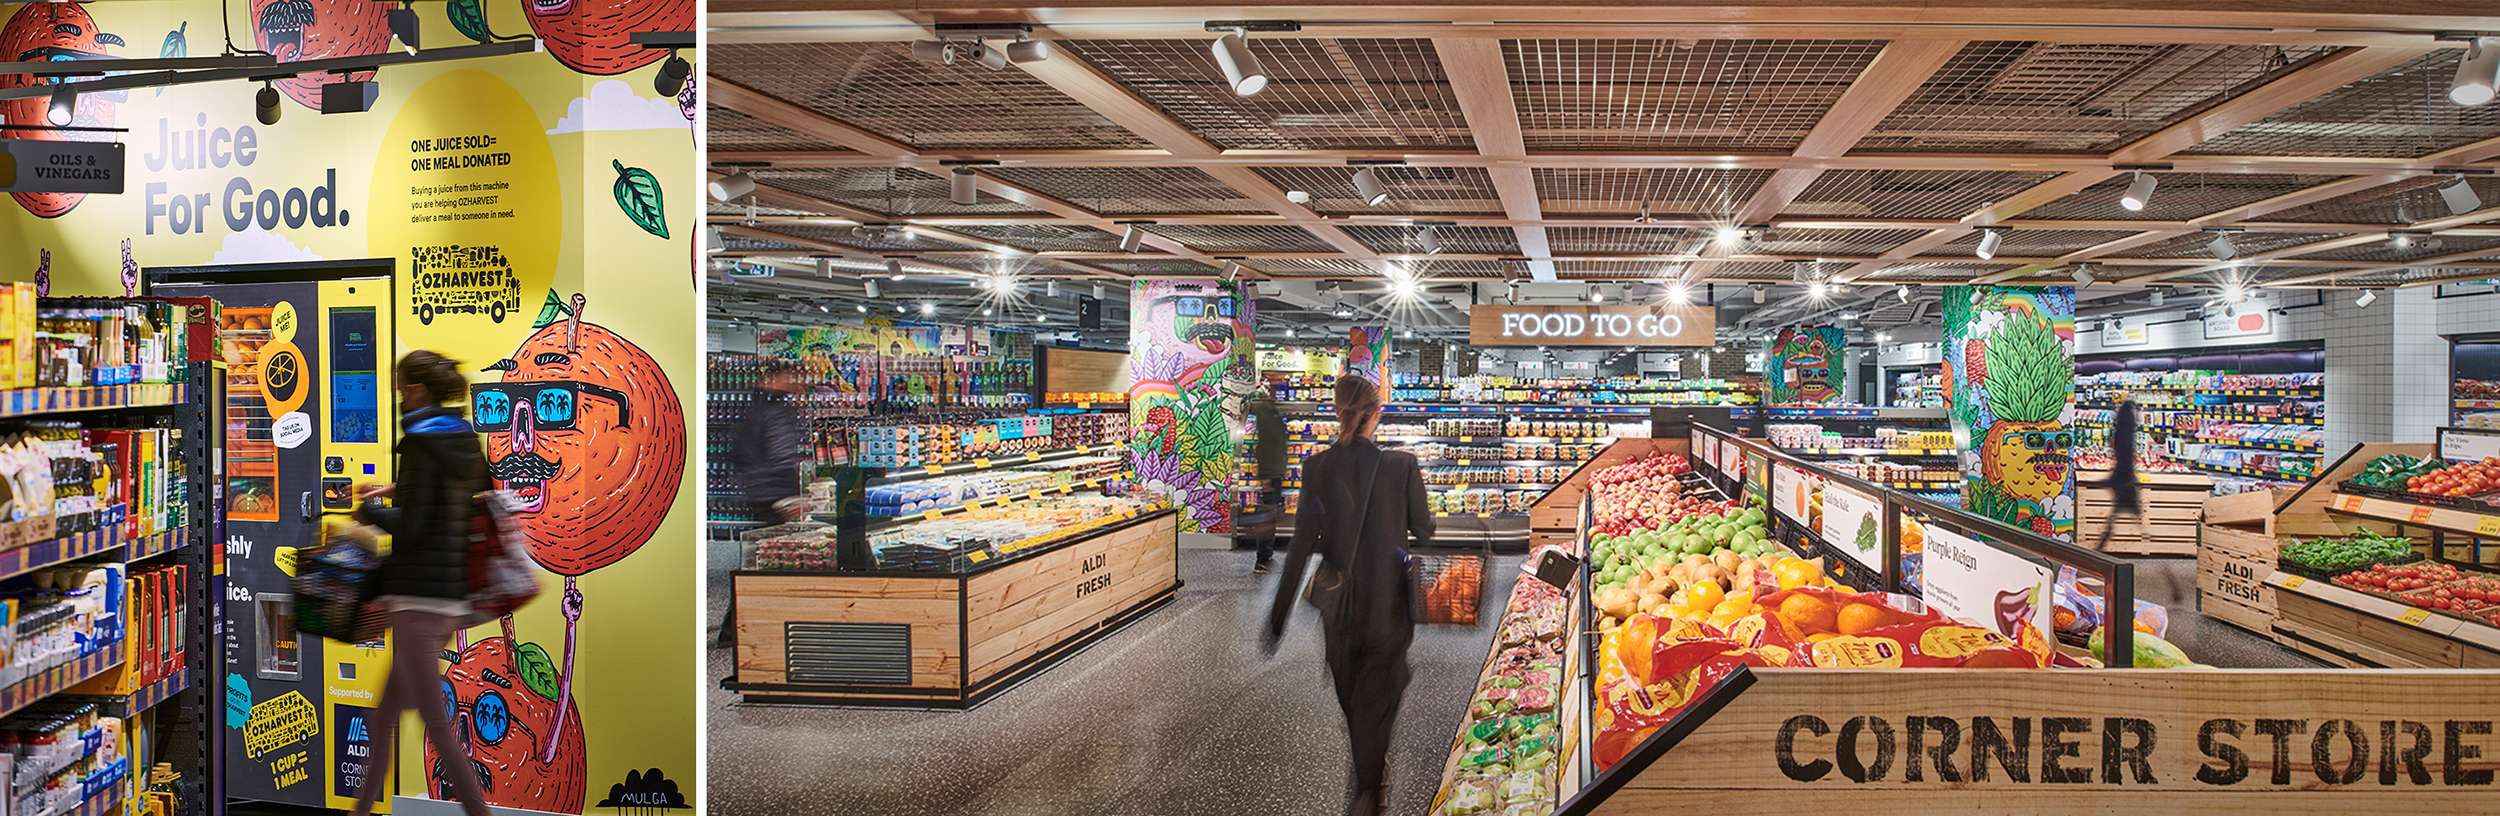 Aldi’s Corner Store flagship in North Sydney, Australia, helps the brand get closer to its customers –emotionally and physically.